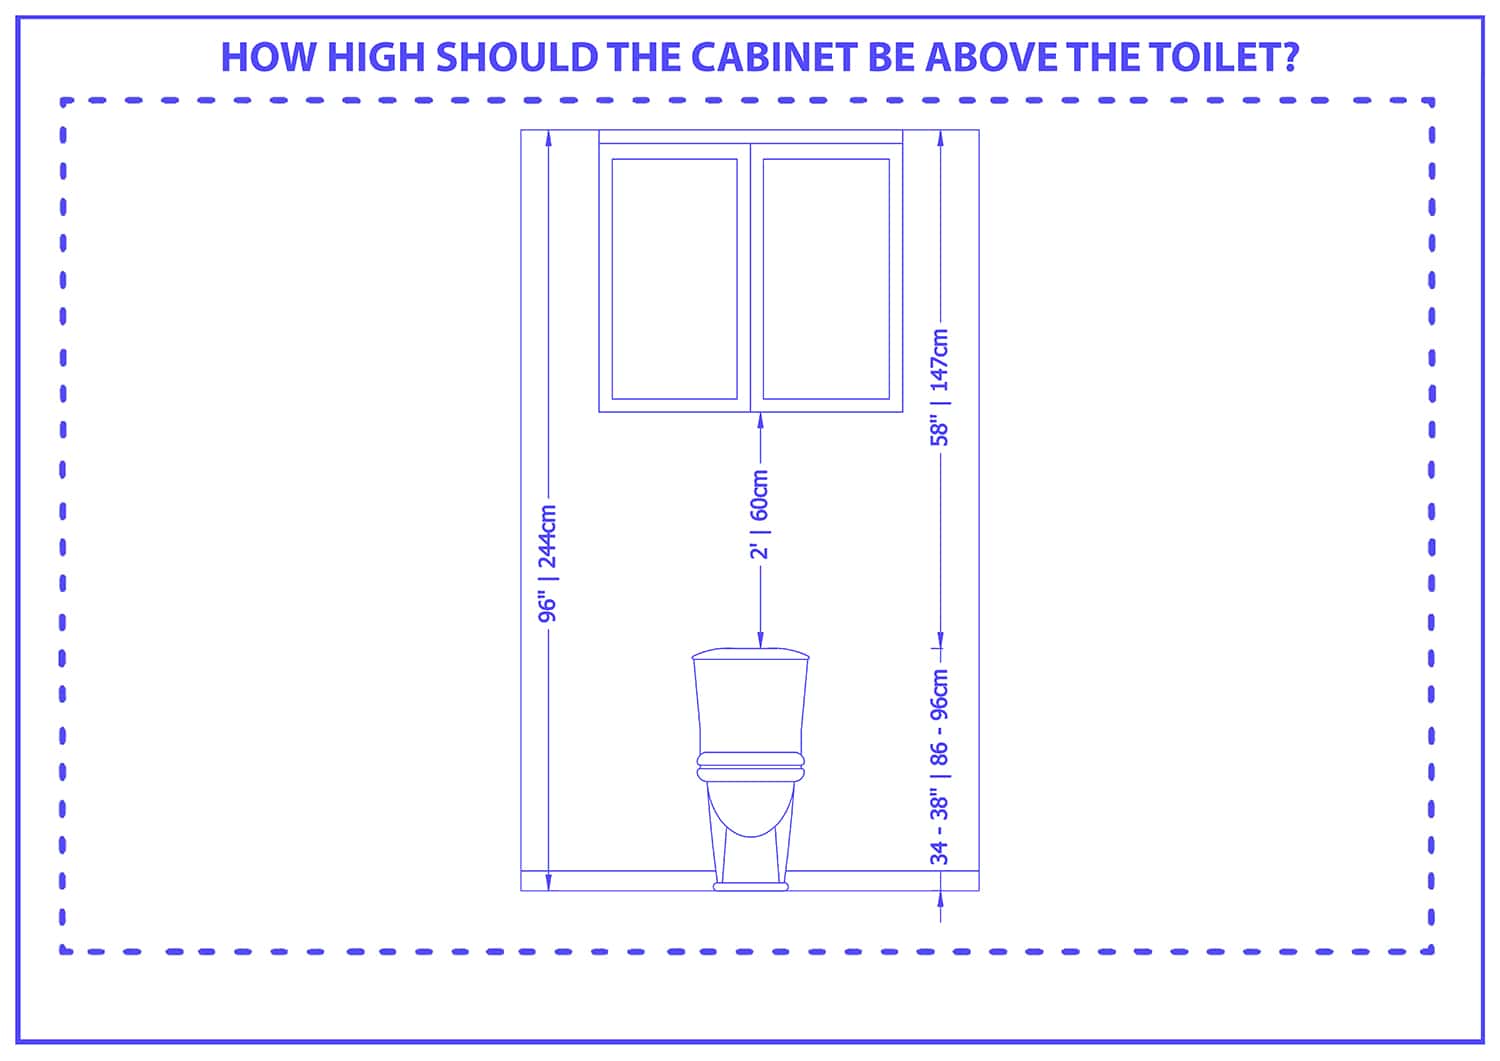 How high should the cabinet be above the toilet